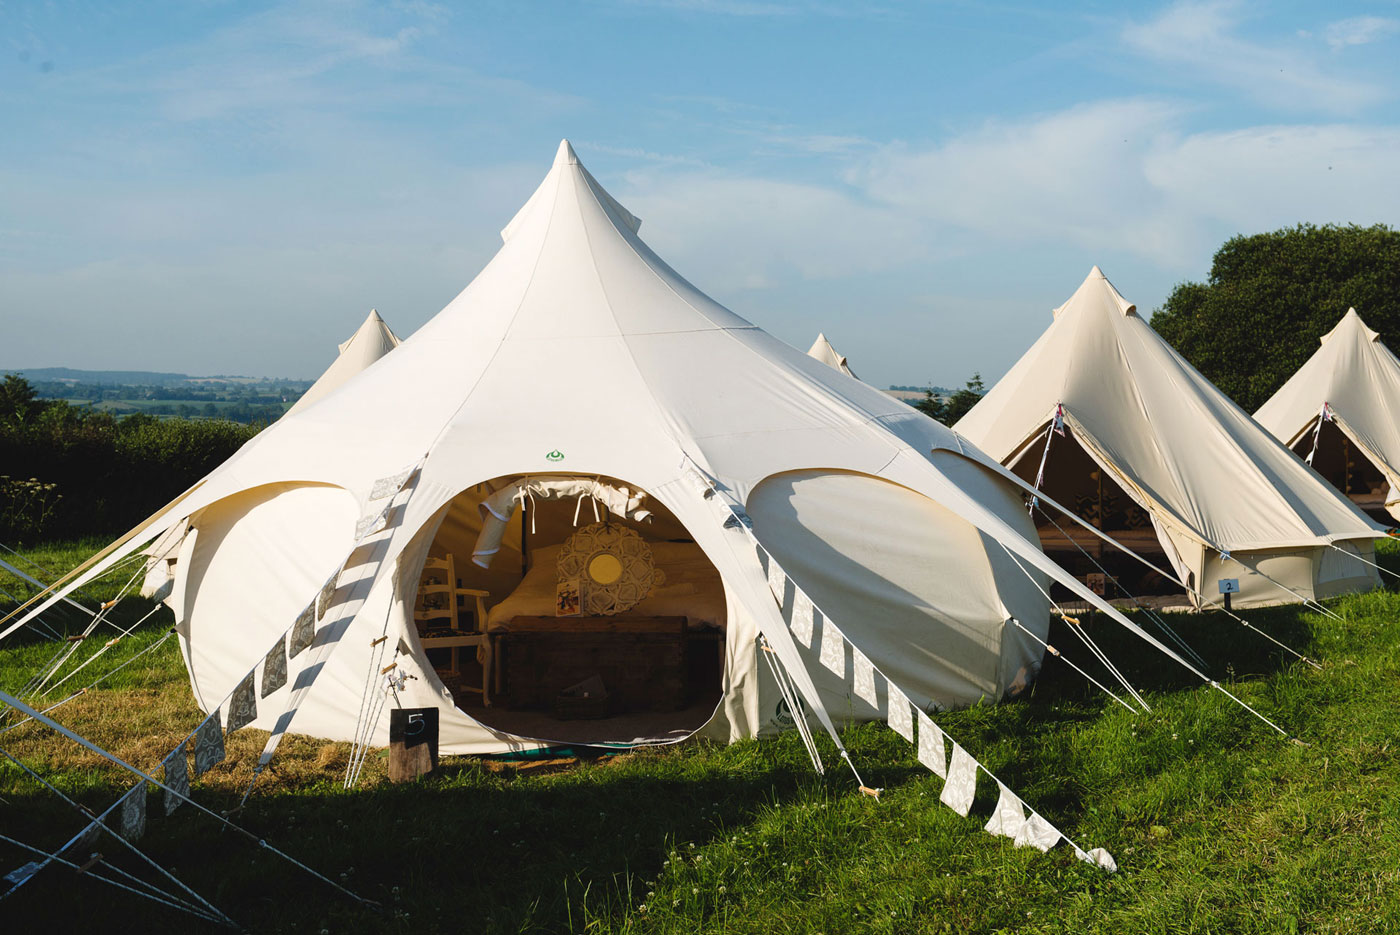 Lotus Belle glamping at Glastonbury Festival for Pennard Orchard